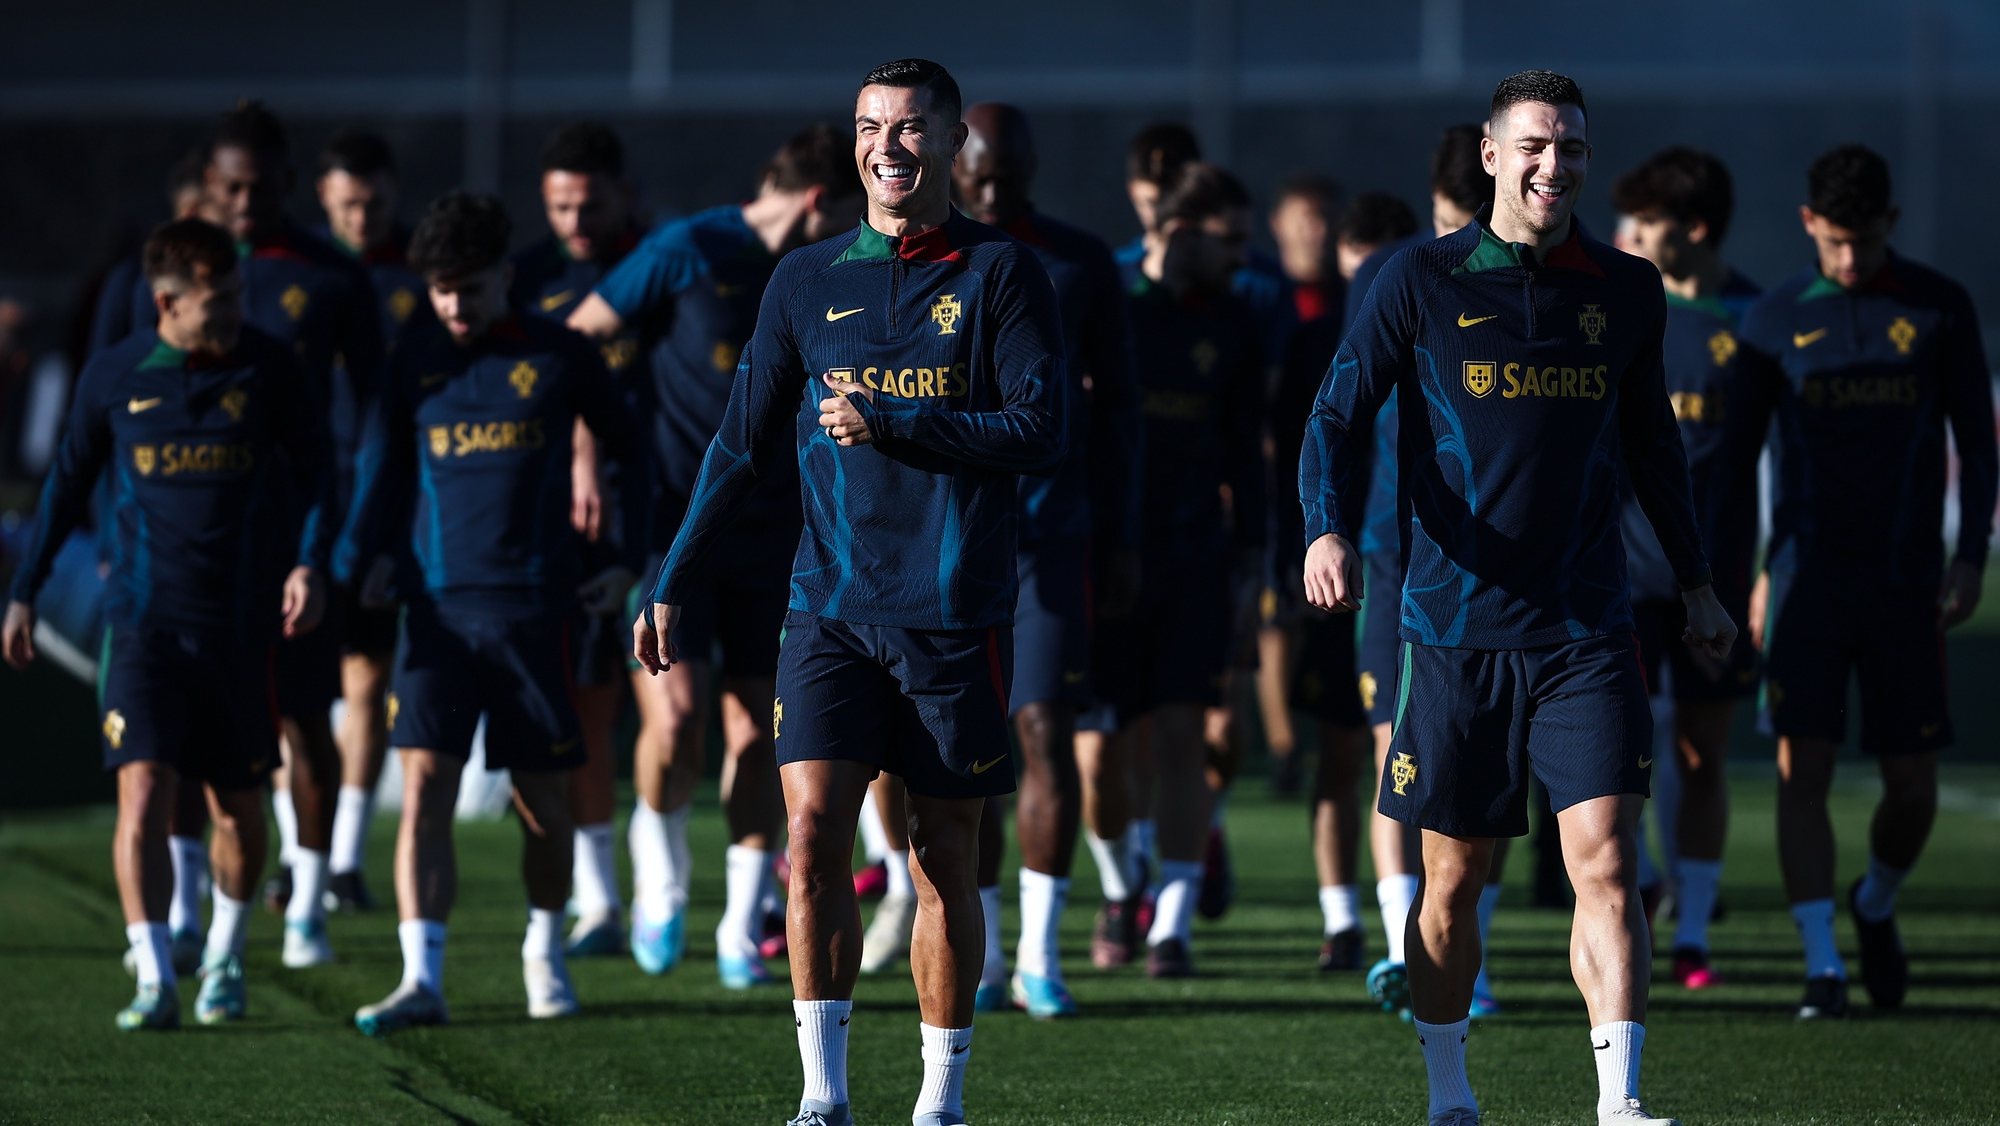 Portugal soccer team players Cristiano Ronaldo (L) and Diogo Dalot (R) during a training session at Cidade do Futebol in Oeiras, outskirts of Lisbon, Portugal, 21 March 2023. Portugal will play his Euro 2024 Group J qualifying soccer match with Liechtenstein next Thursday at Alvalade Stadium in Lisbon. RODRIGO ANTUNES/LUSA